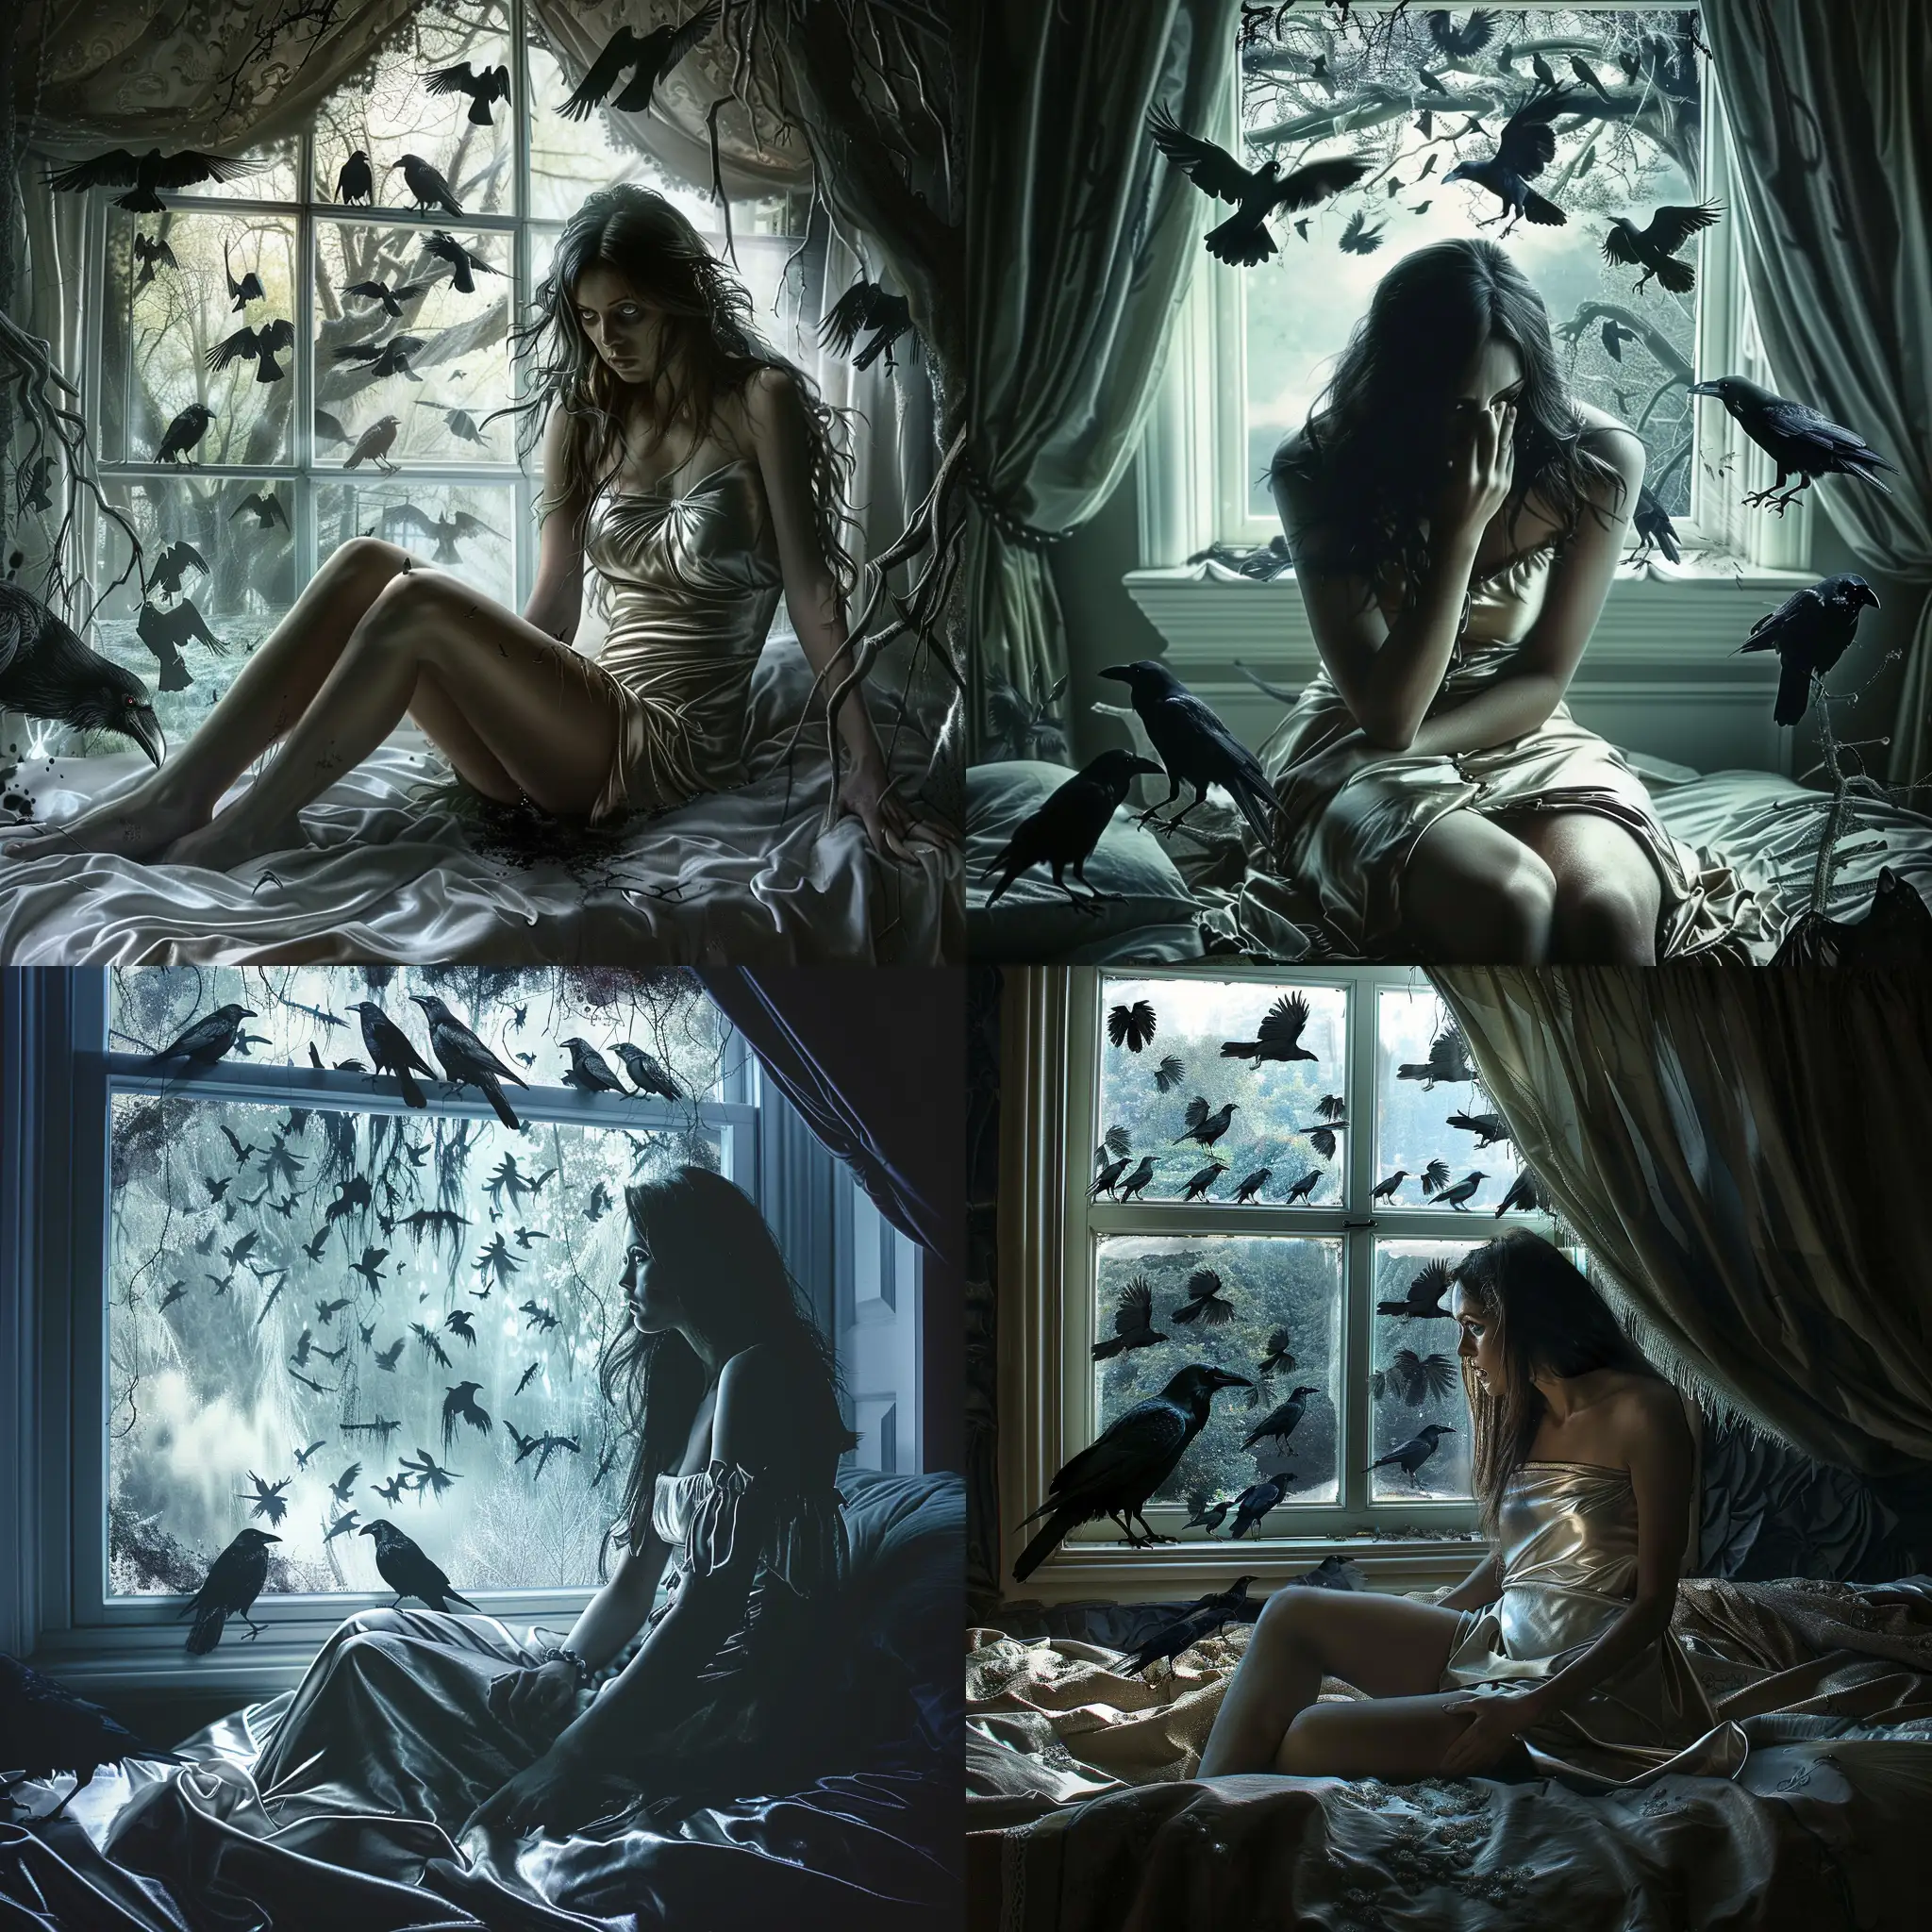 A striking  highly detailed   gothic image of  beautiful fearful woman sitting on her bed wearing a satin nightdress. Outside the window there are lots of menacing ravens looking in. Beautiful magical mysterious fantasy surreal highly detailed 